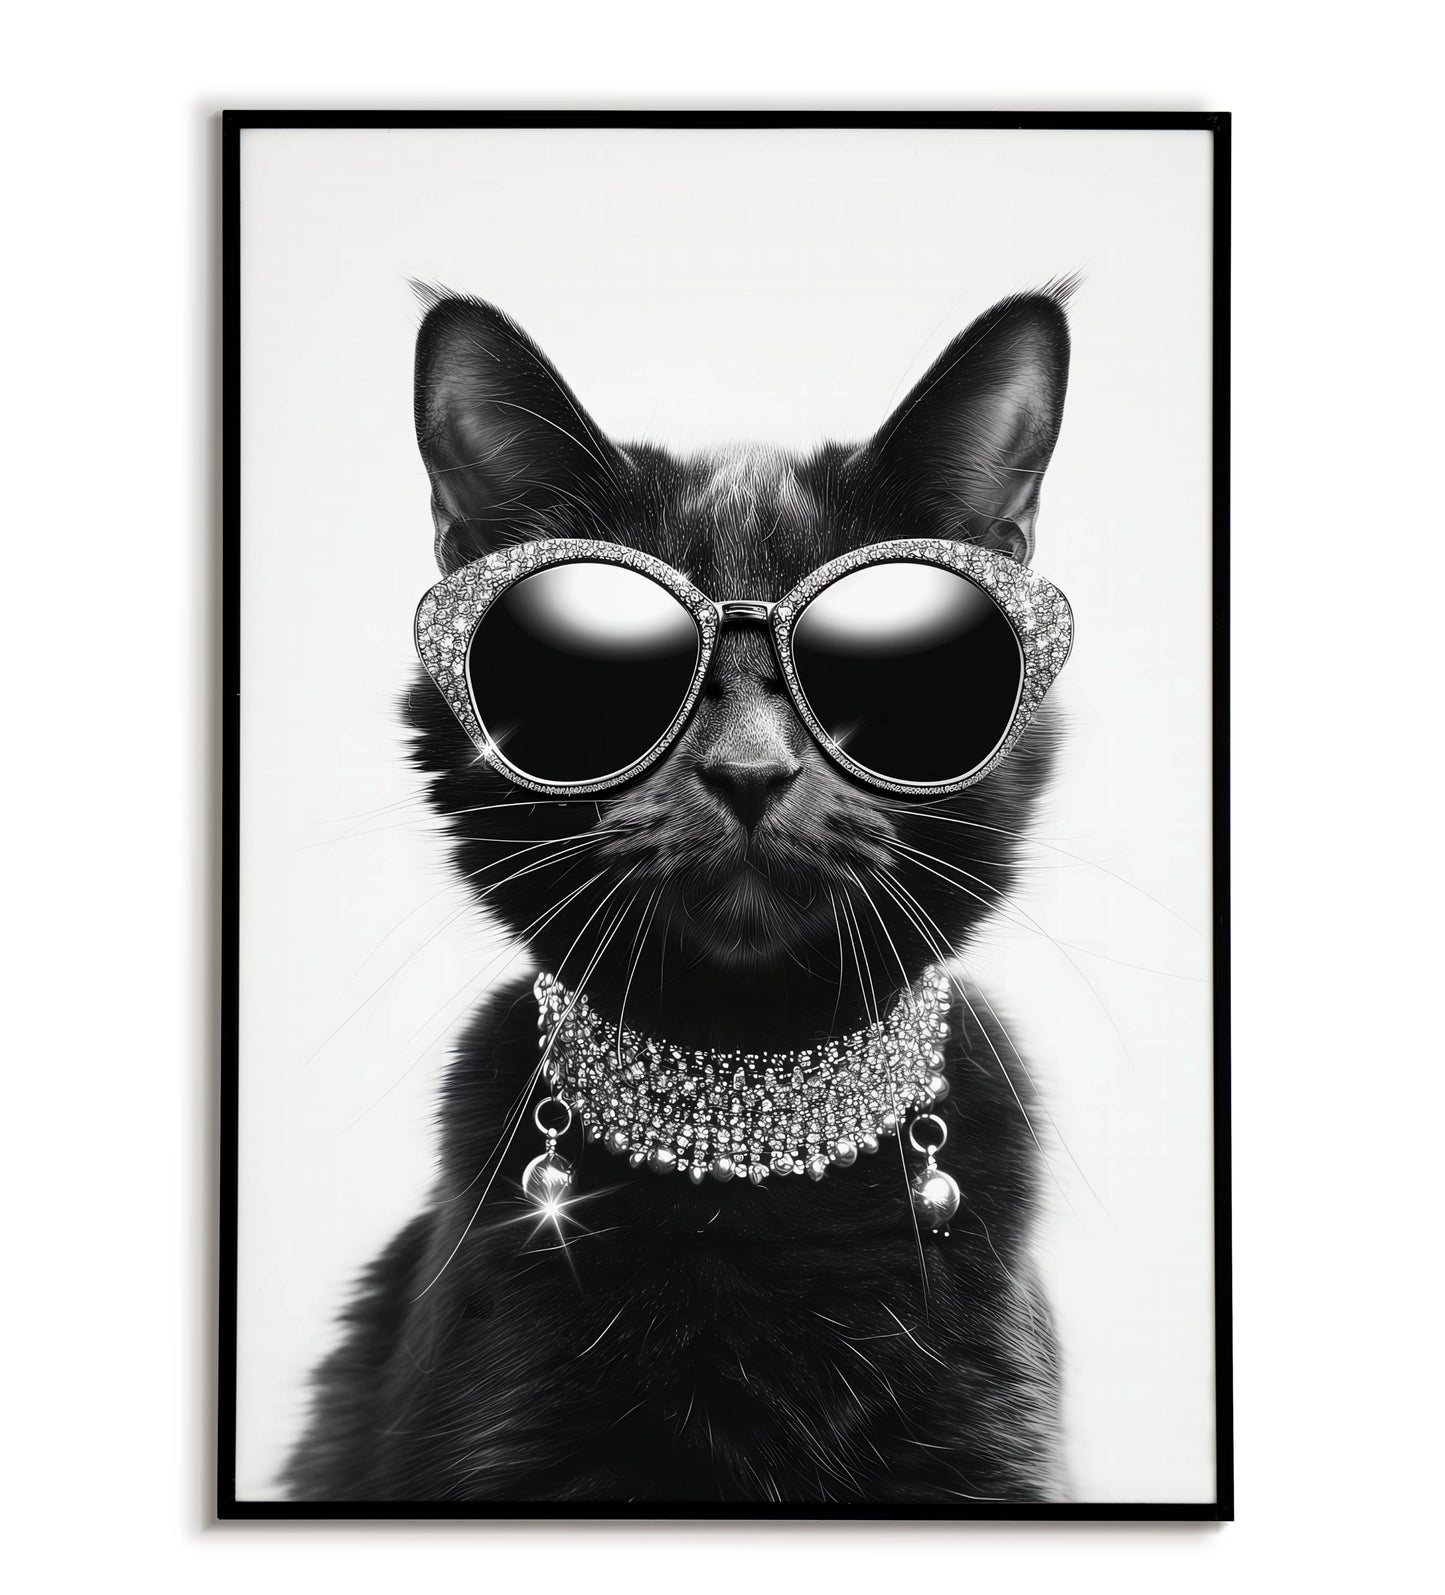 Cat in Jewellery poster. Playful and whimsical artwork depicting a cat wearing jewellery